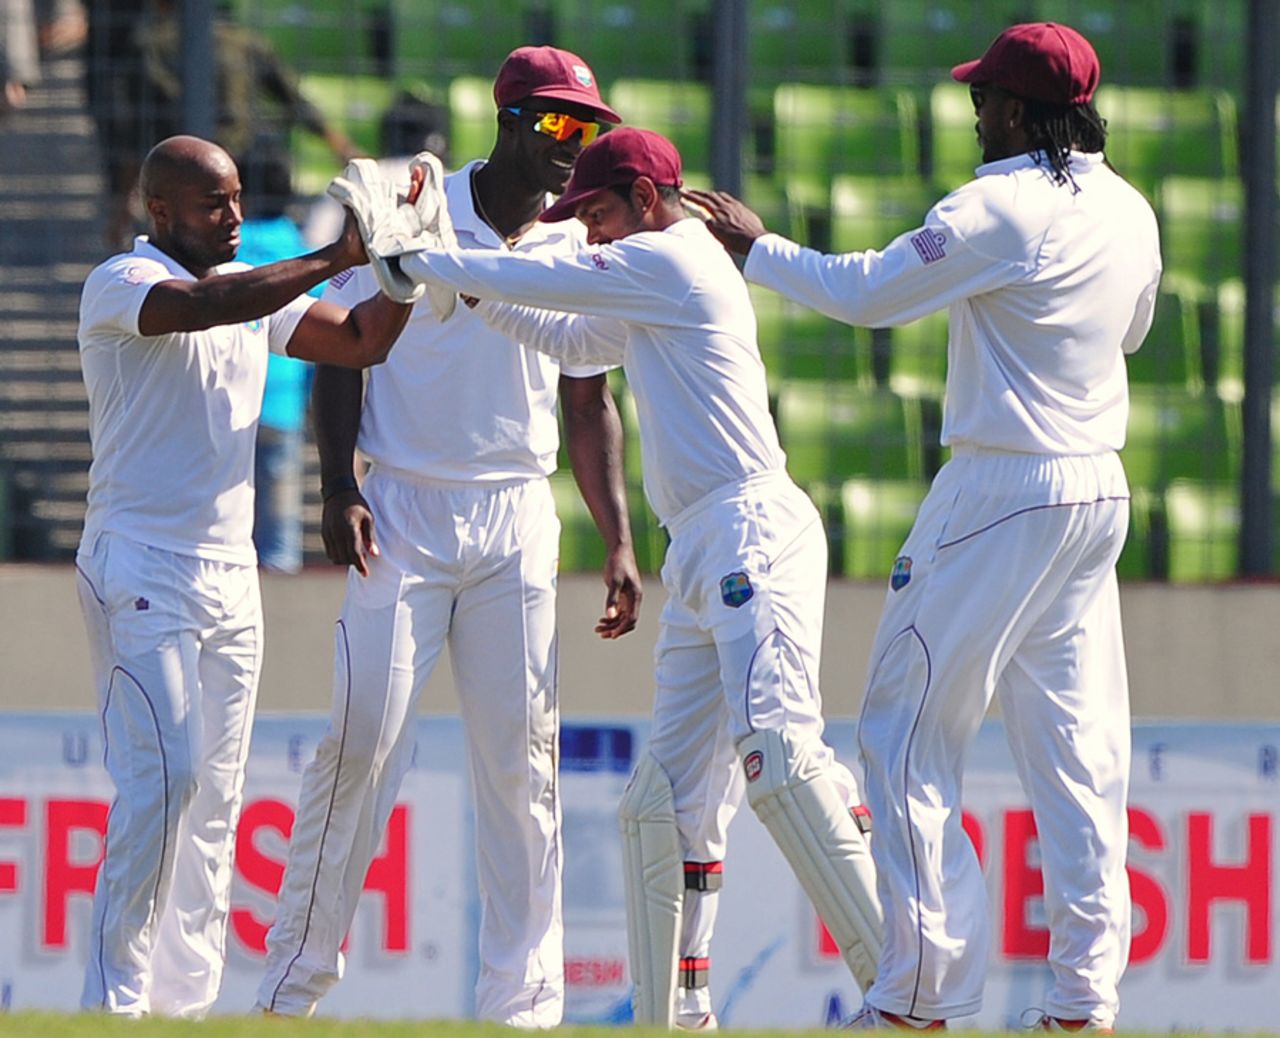 Tino Best is congratulated by his team-mates after a strike, Bangladesh v West Indies, 1st Test, Mirpur, 5th day, November 17, 2012